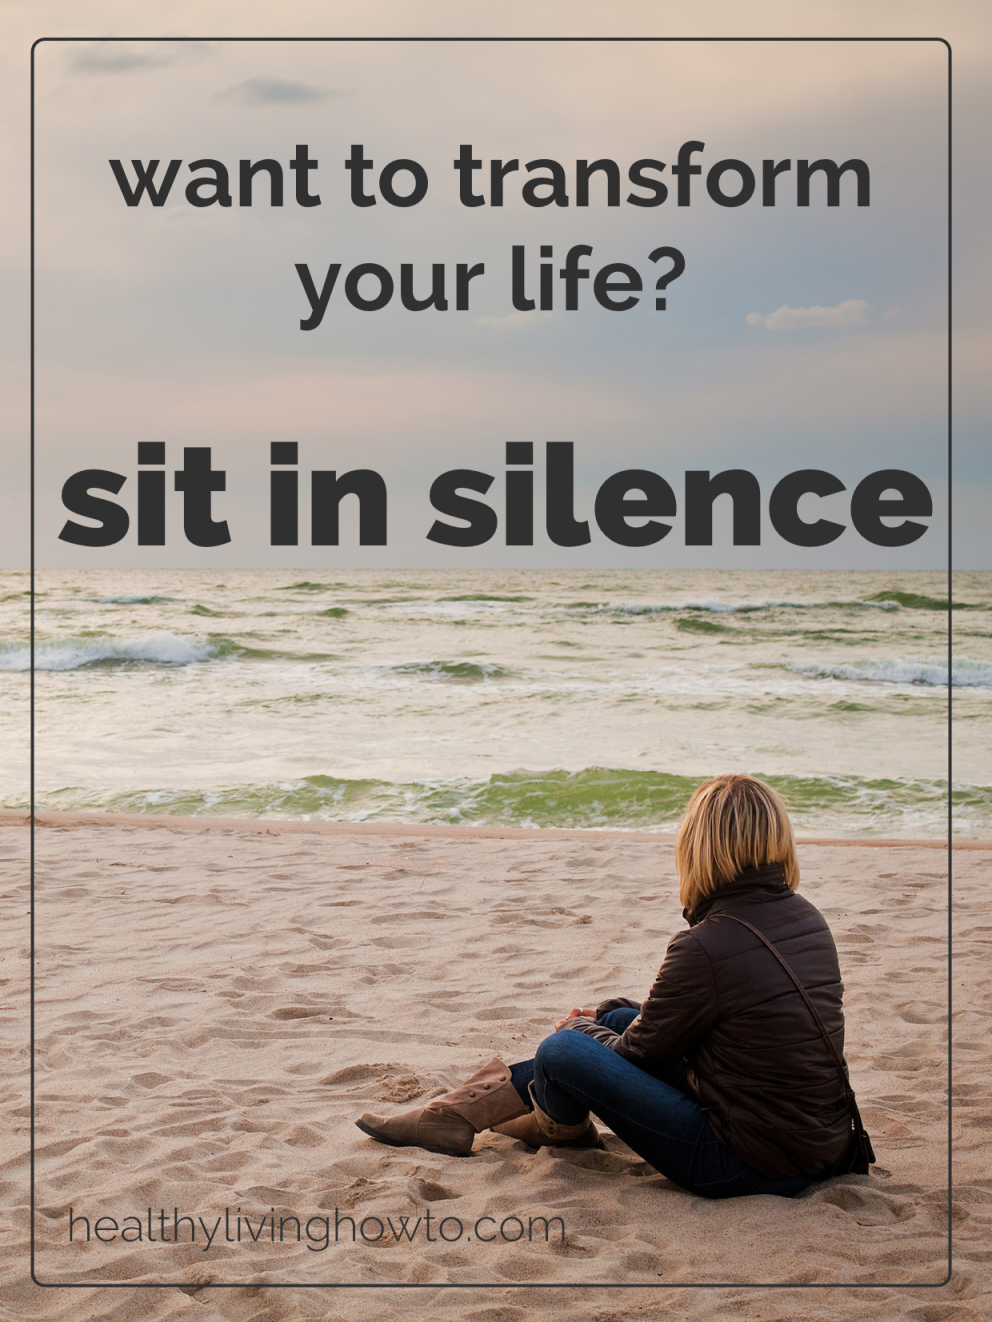 20 Ways Sitting In Silence Can Completely Transform Your Life - Healthy